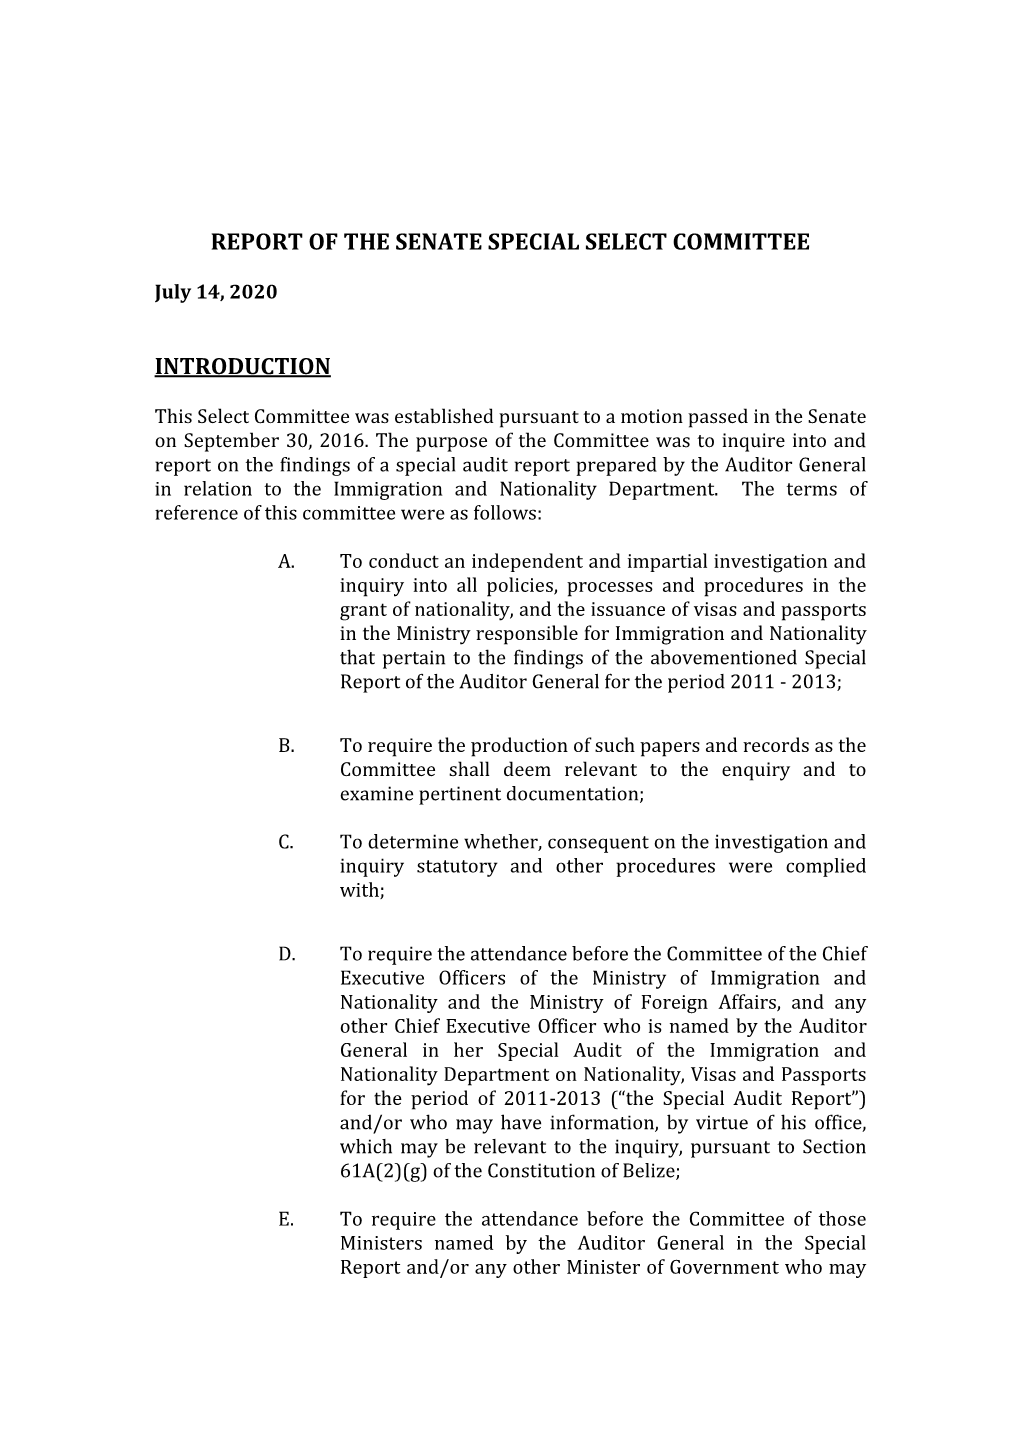 Report of the Senate Special Select Committee